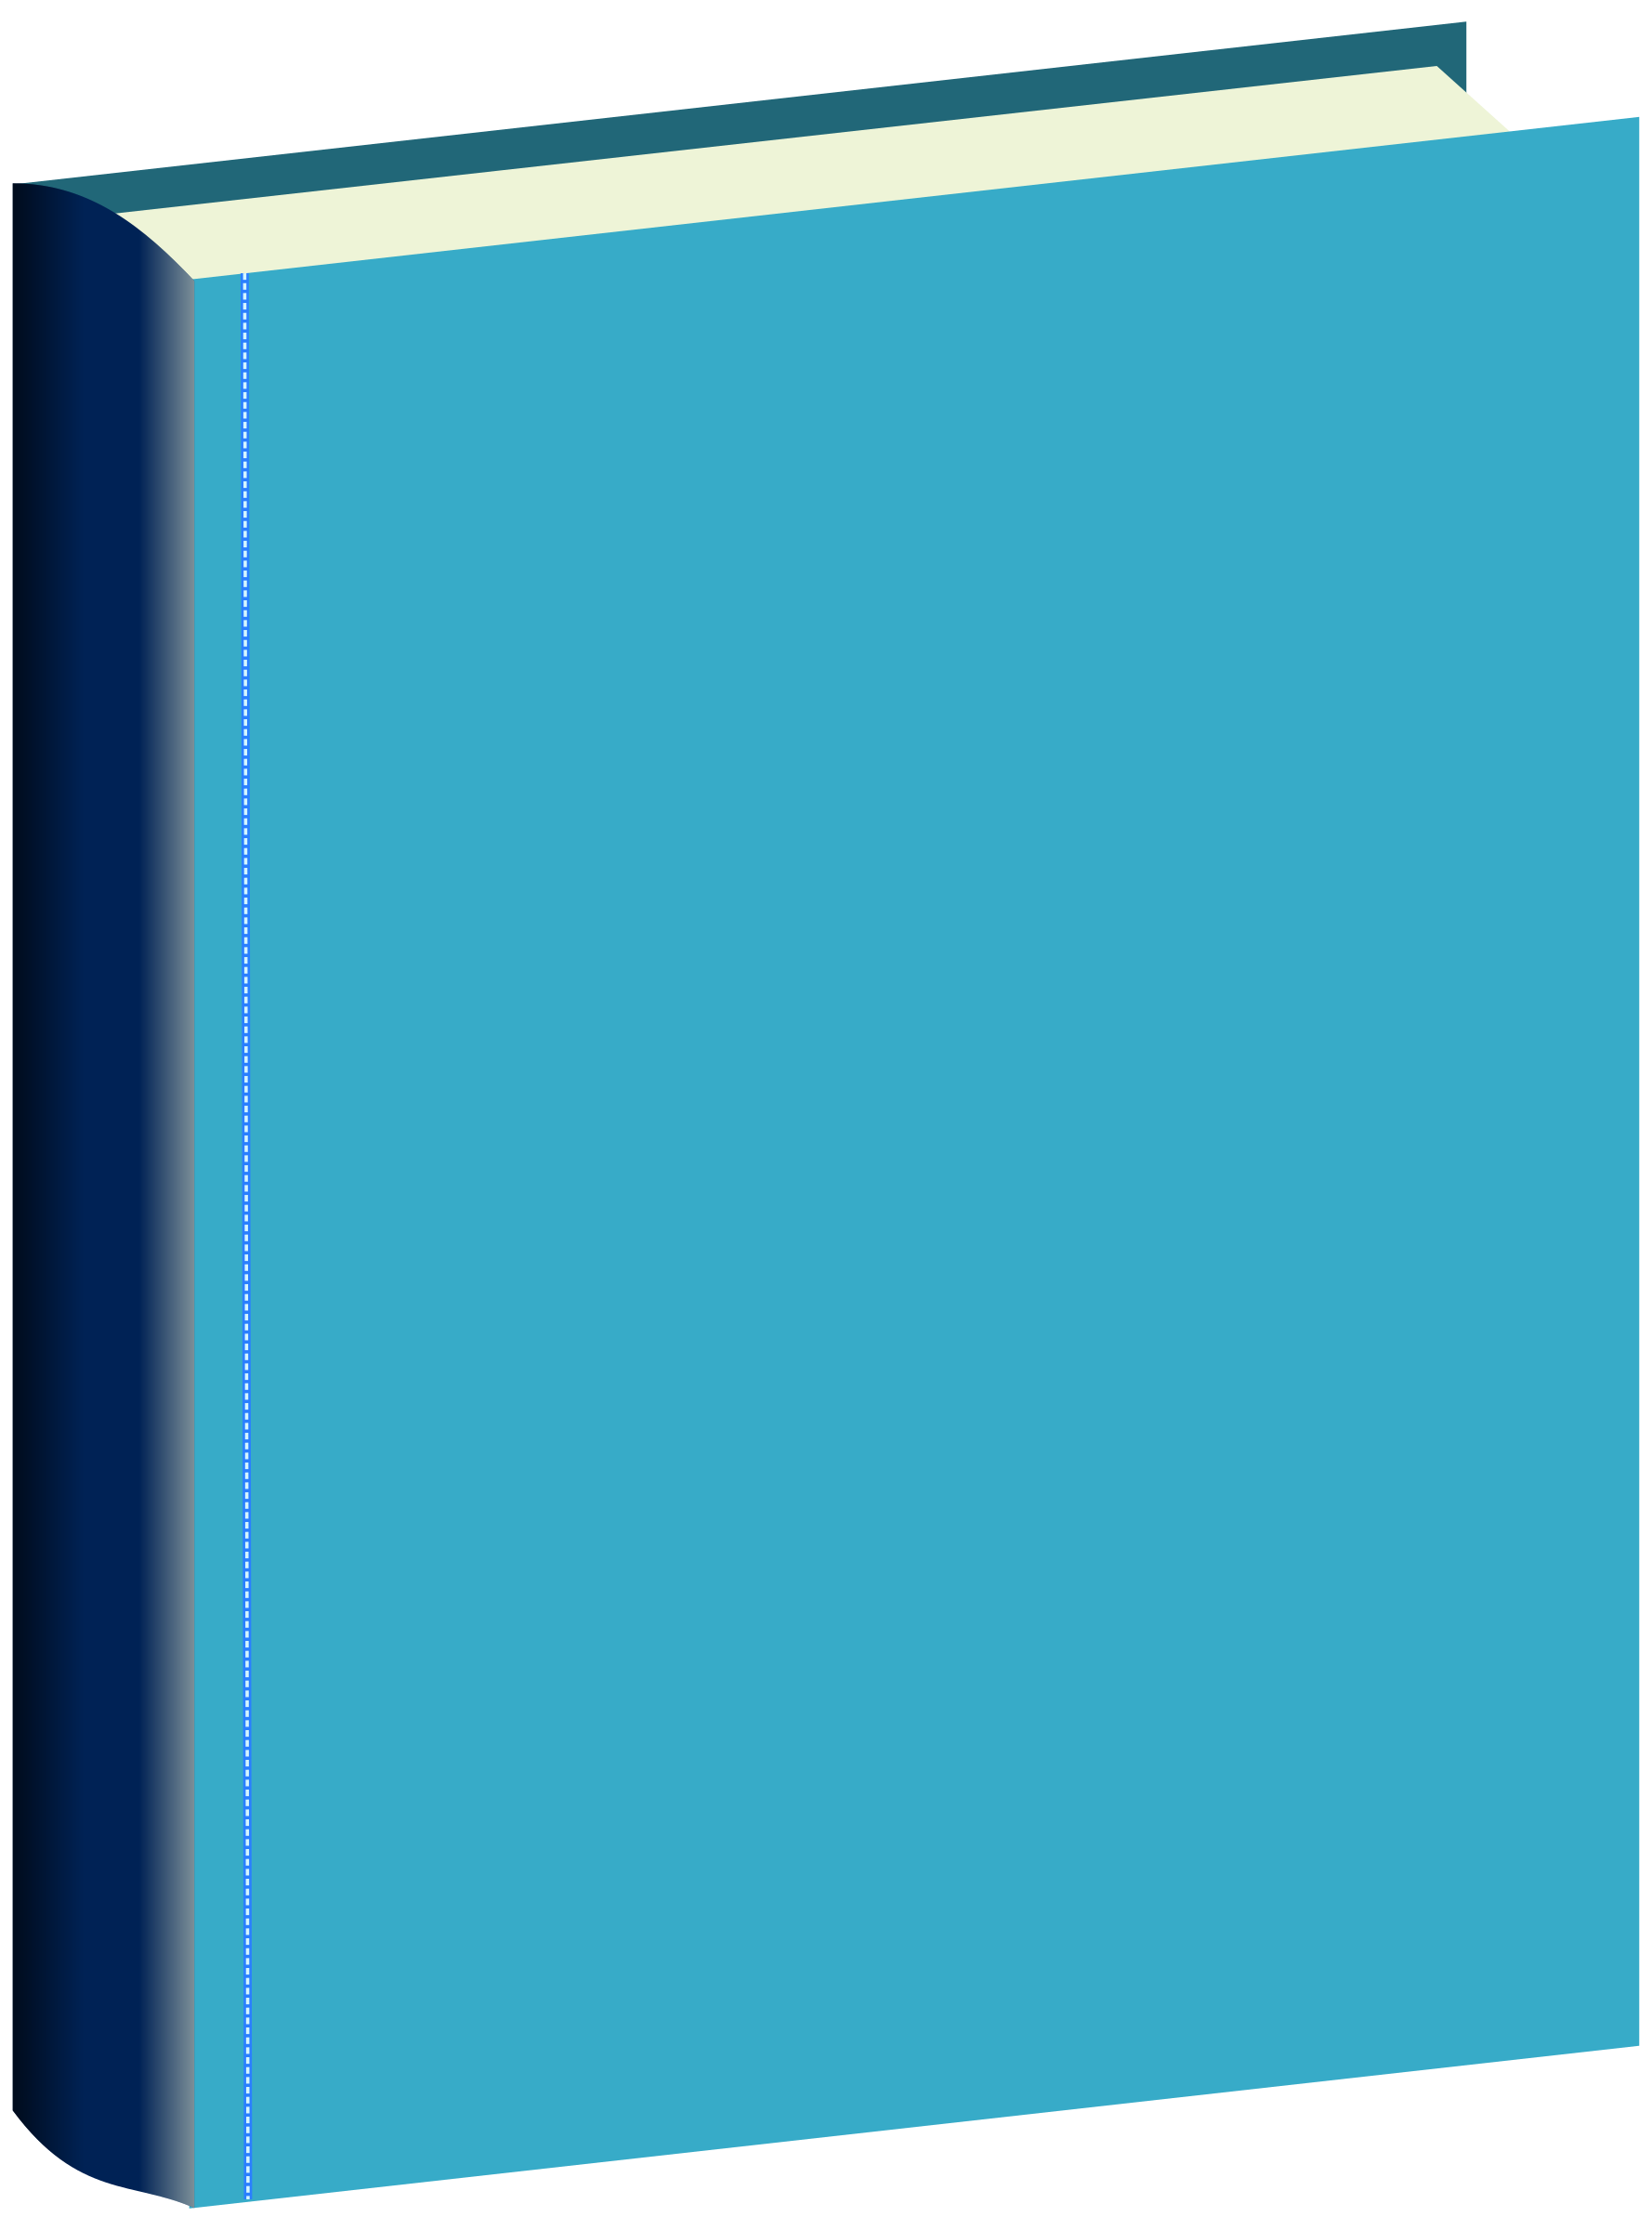 A Blue Rectangular Object With A Black Border